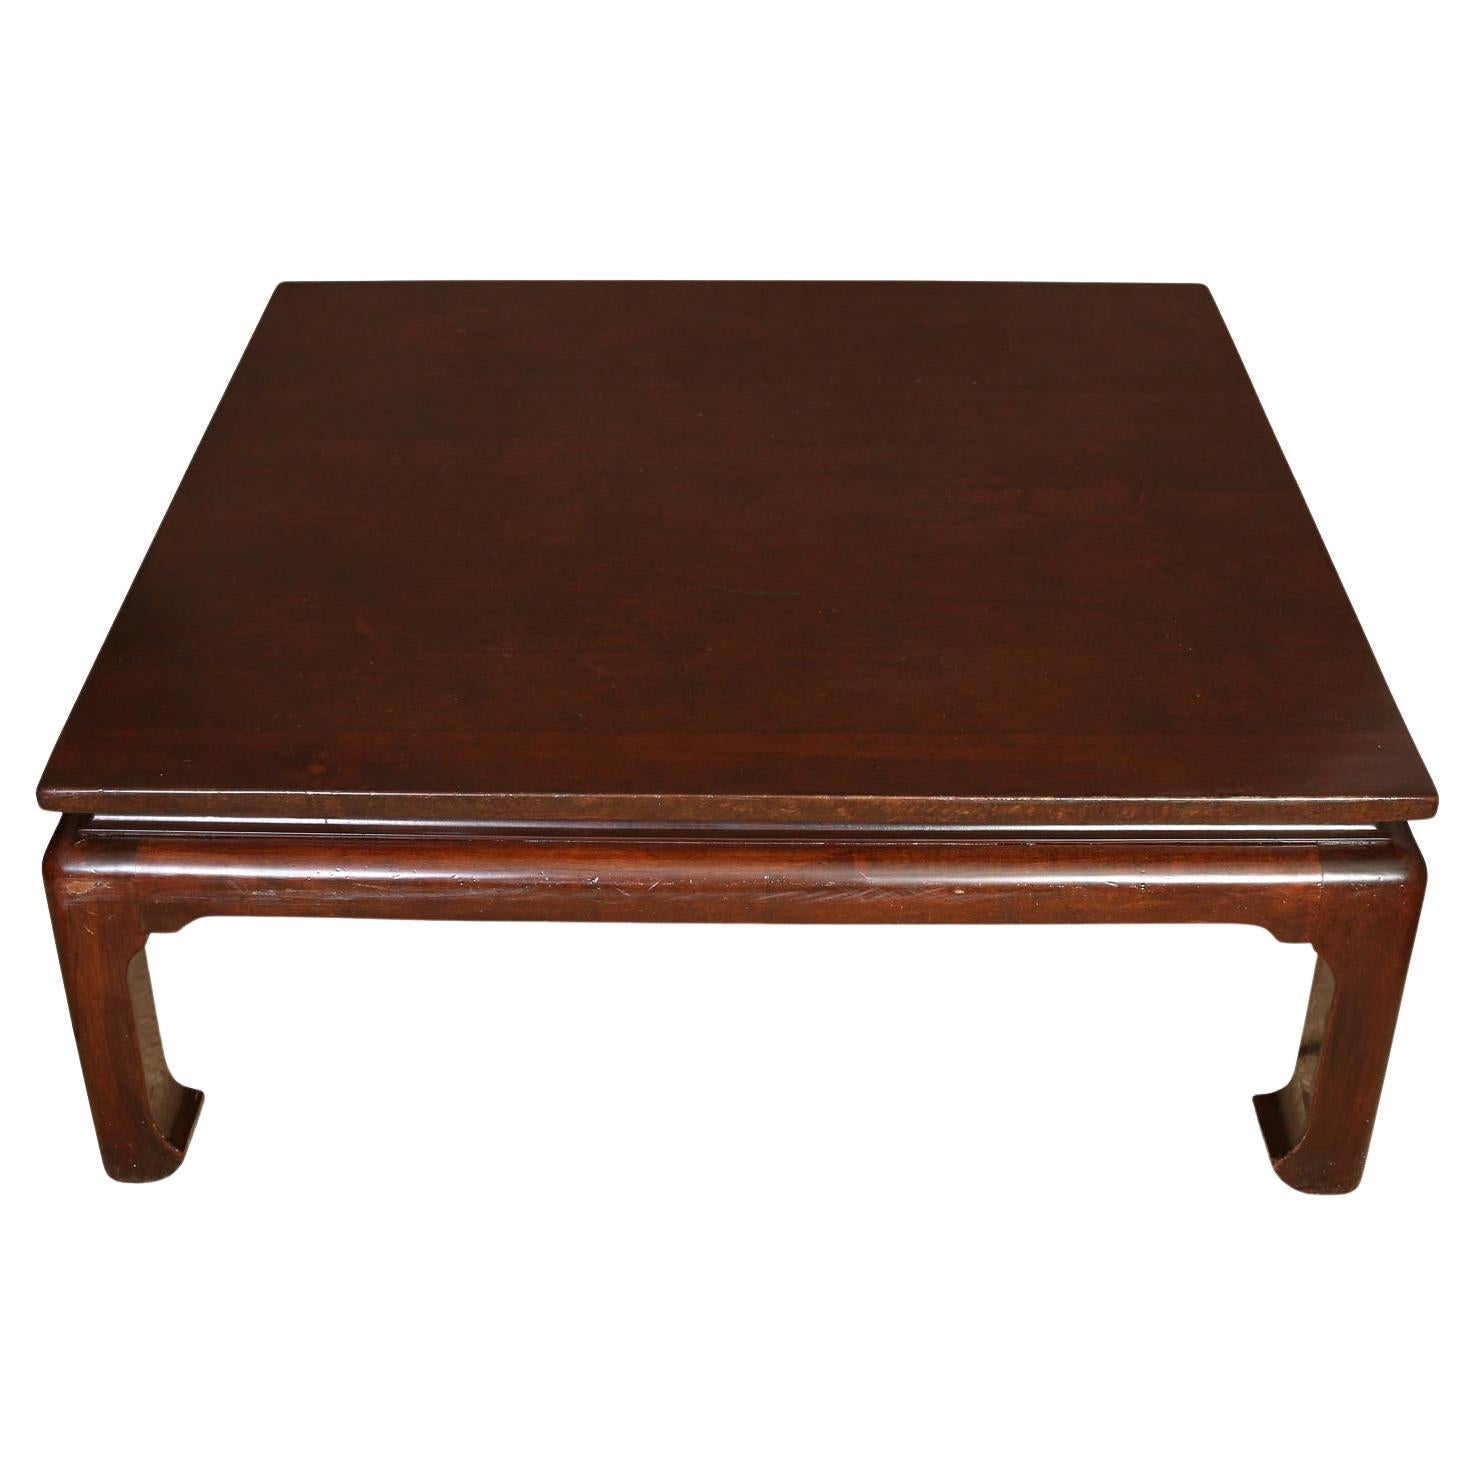 Square Asian Style Coffee Table With Ming Feet